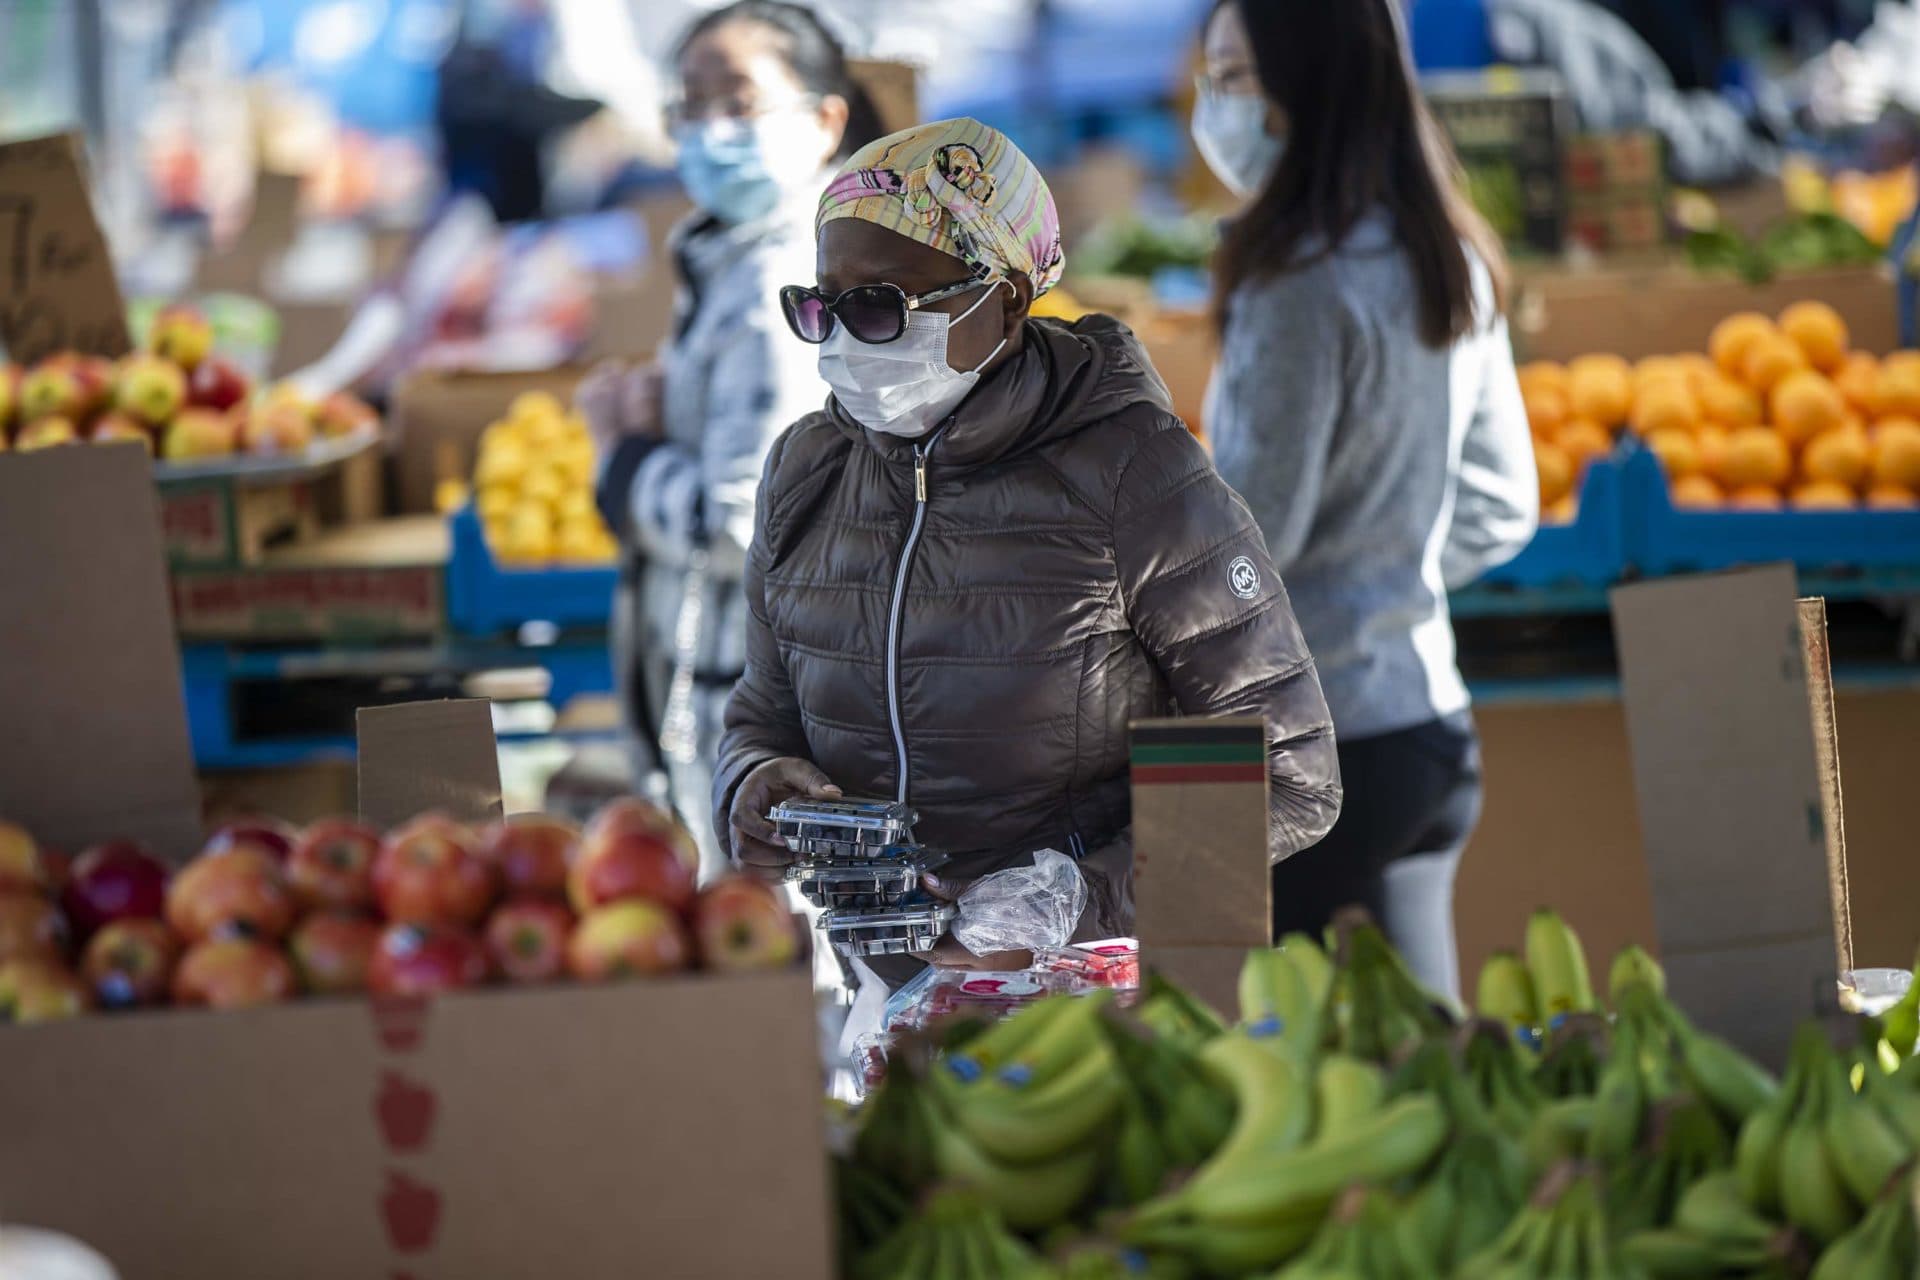 March 27: A woman peruses the fruit at one of the stands at Haymarket on Blackstone Street. (Jesse Costa/WBUR)